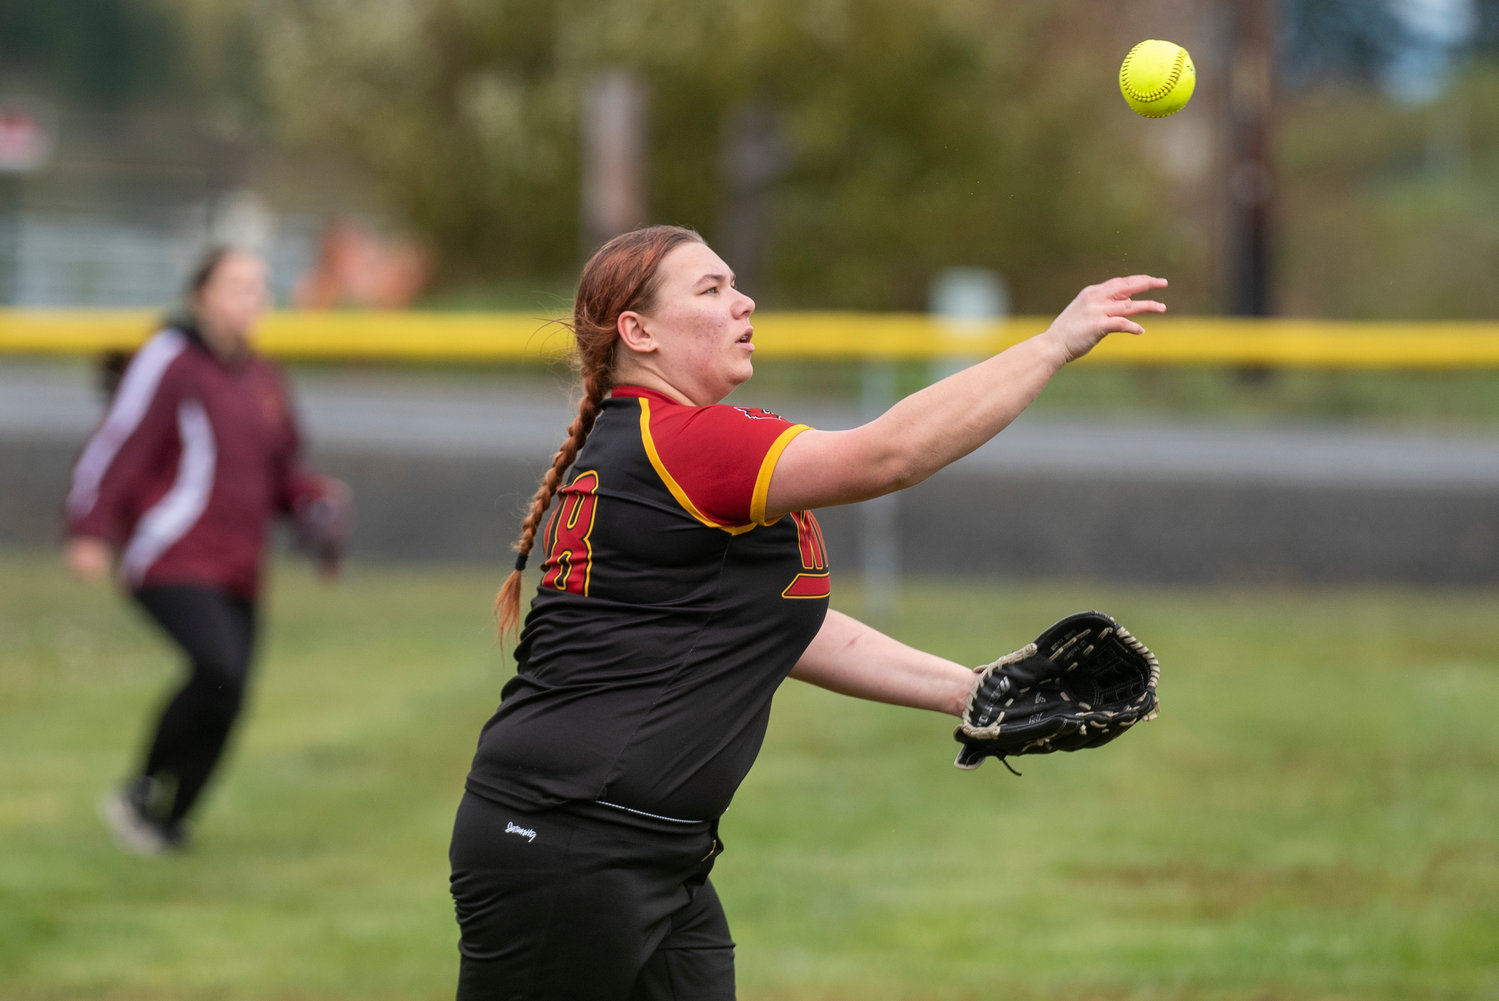 Winlock right fielder Josalynn Shepardson makes a throw to the infield after an Onalaska base hit during a home game on April 21.